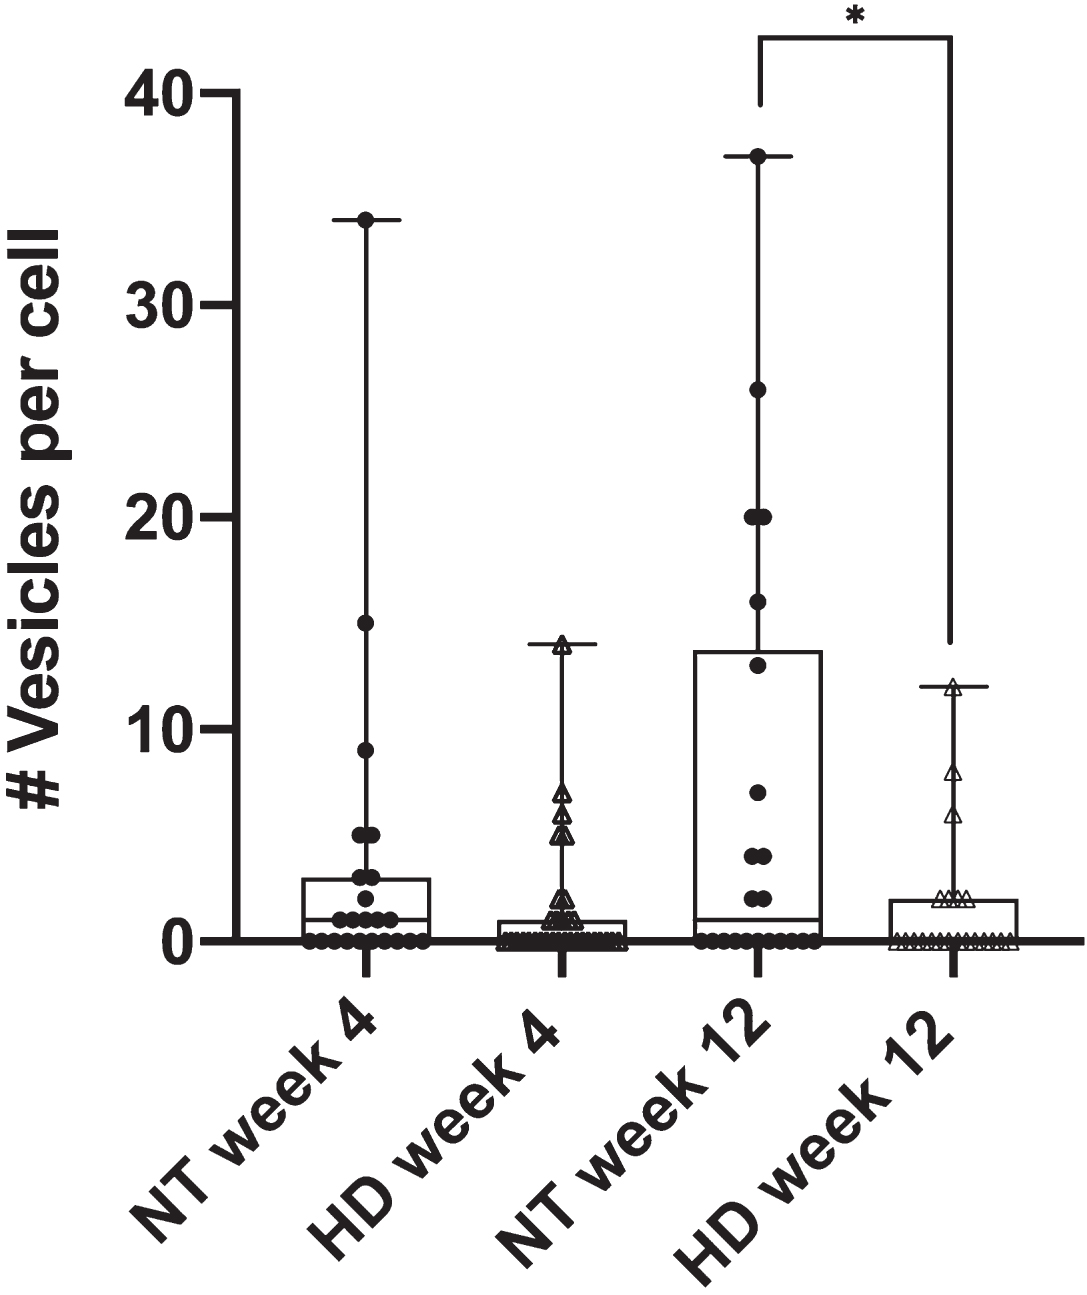 R6/2 HD astrocytes form significantly less phagocytic vesicles per cell in astrocytes derived from week 12 mice when compared to NT astrocytes (p = 0.03 via unpaired 2 tailed t test). NT astrocytes averaged 6.9 vesicles formed per cell (n = 22), vs. 1.6 vesicles per cell observed in R6/2 astrocytes (n = 21). No significant difference was observed in astrocytes derived from week 4 mice (p = 0.16 via unpaired 2 tailed t test) at 3.5 vesicles per cell for NT astrocytes (n = 23) and 1.4 vesicles per cell for R6/2 astrocytes (n = 32). * refers to statistically significant p values where p ≤0.05.